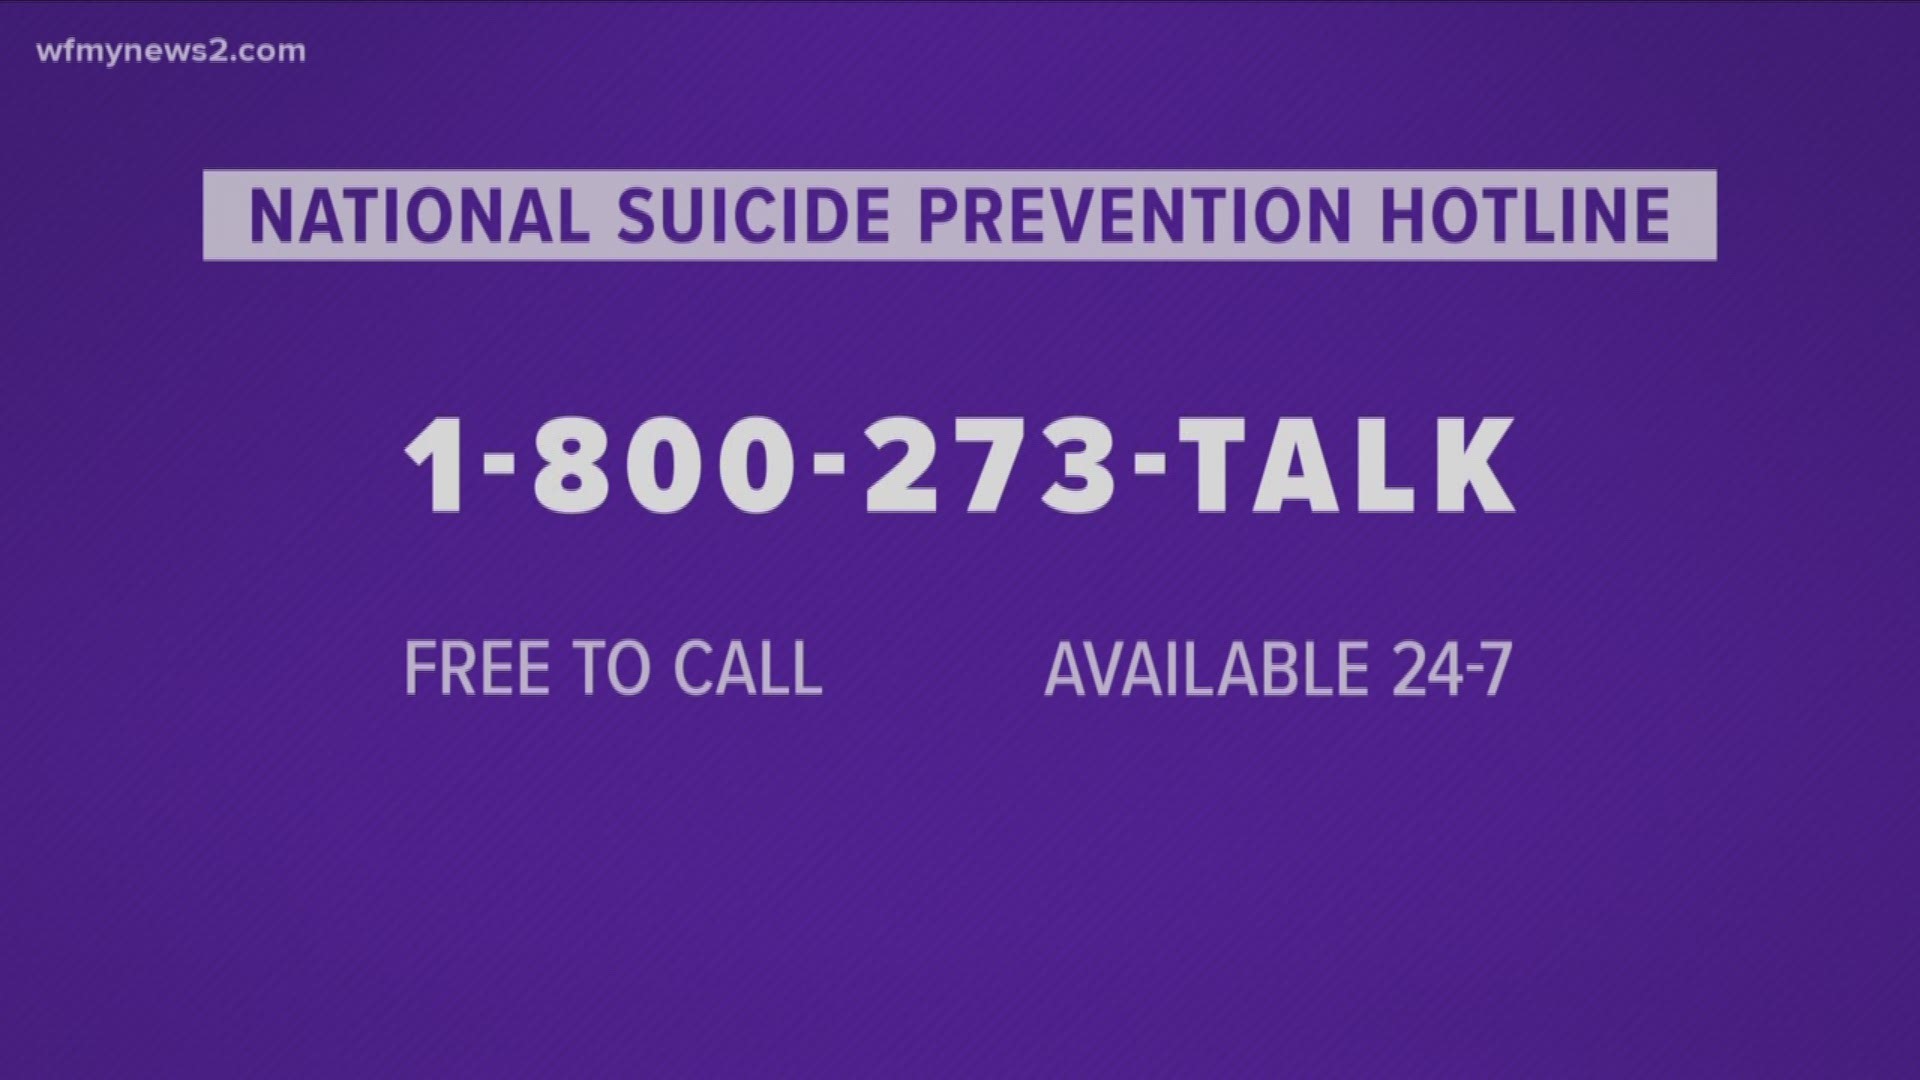 How To Get Involved In Suicide Prevention